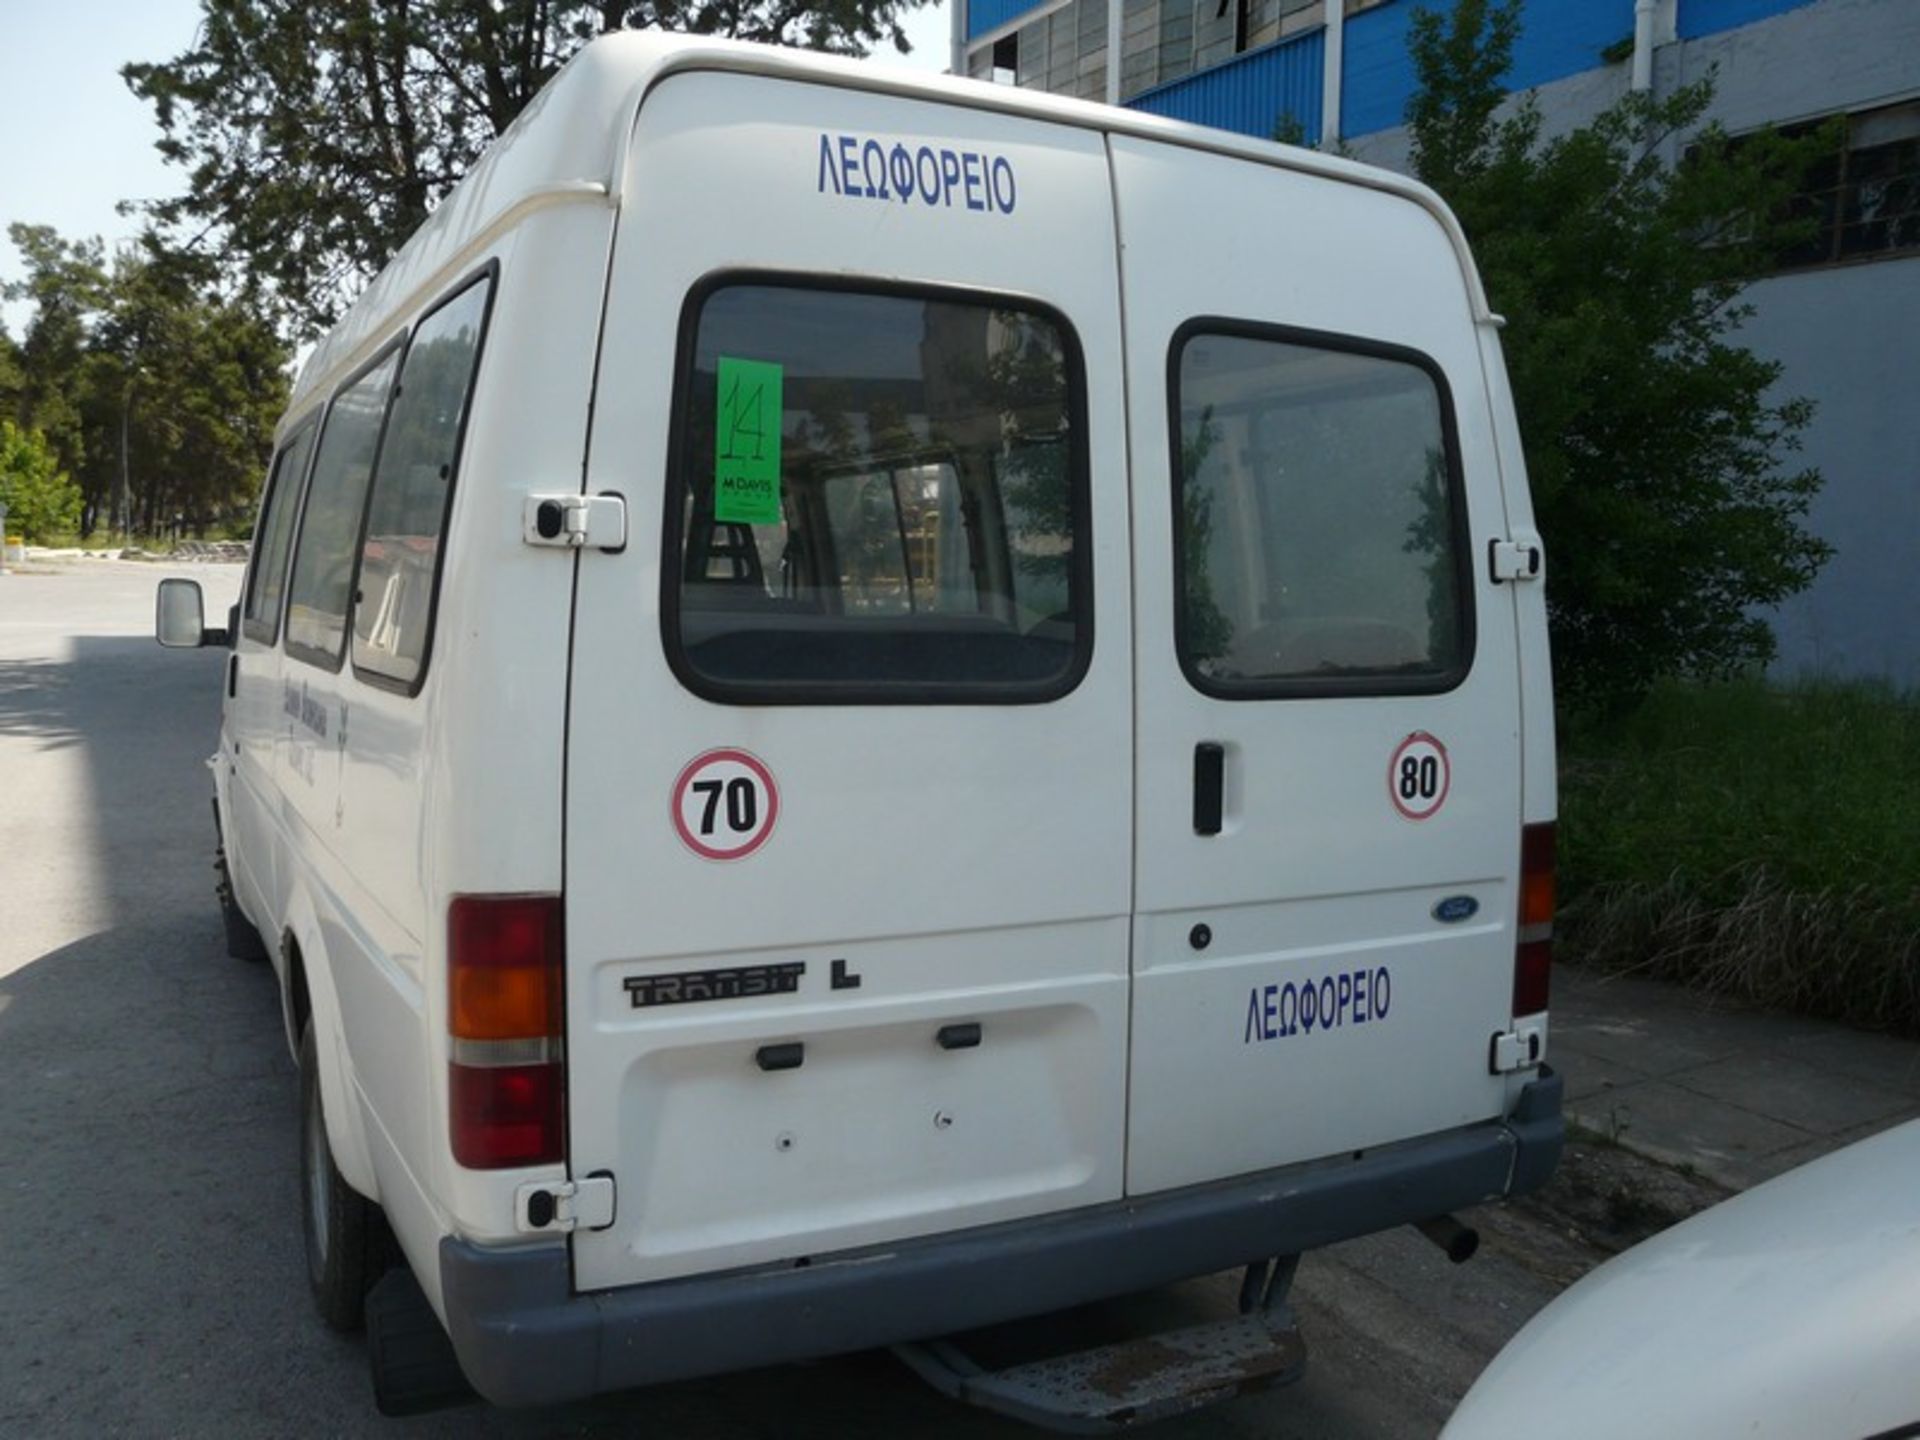 FORD TRANSIT, bus115, diesel, KM 212503, 14+1 seats, REG NBB 8161, Year: 1991 (Located in Greece - - Image 5 of 10